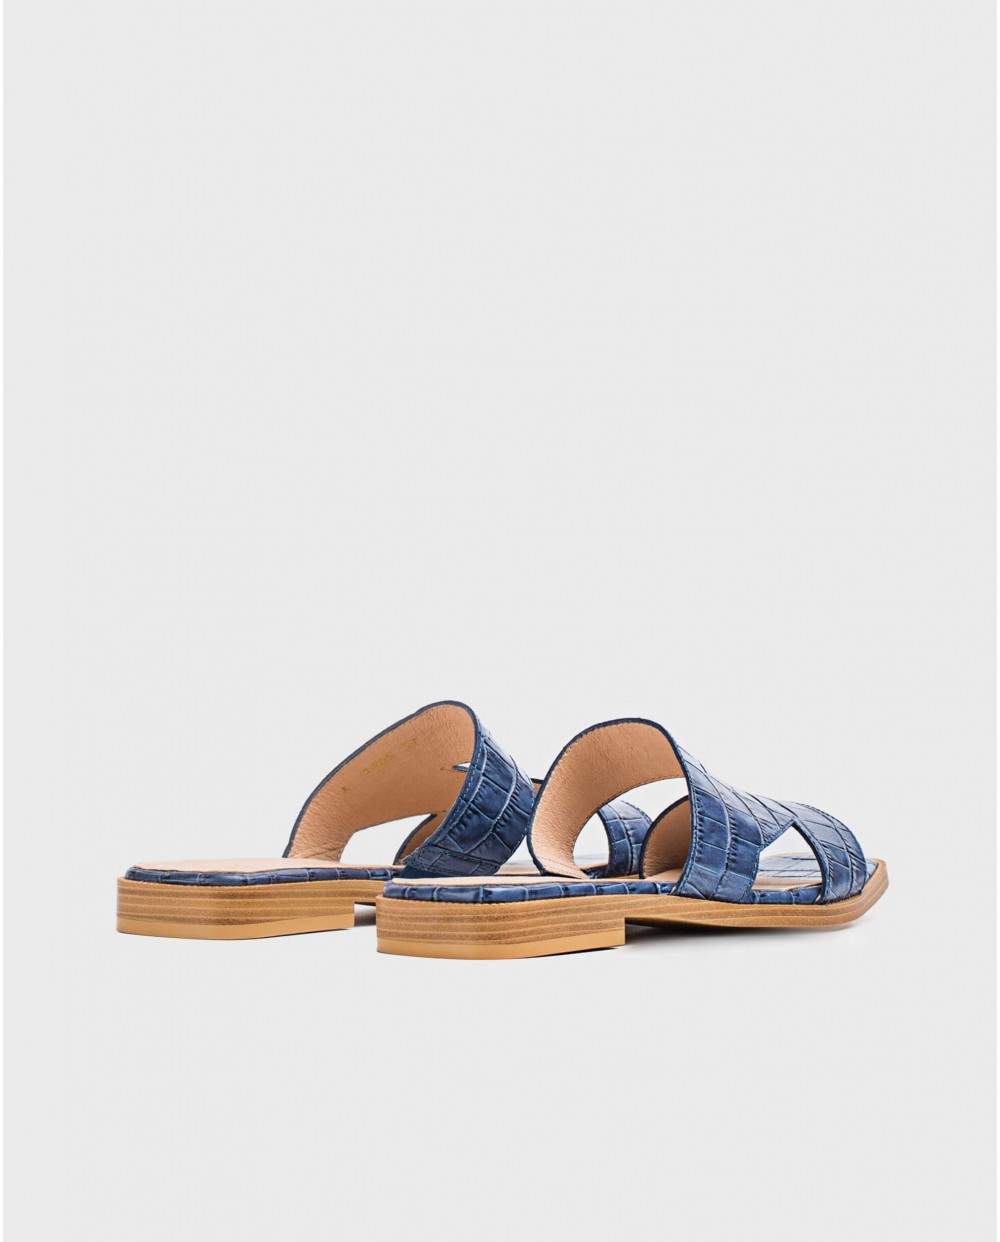 Wonders-Flat Shoes-Leather flat sandal with side cutouts